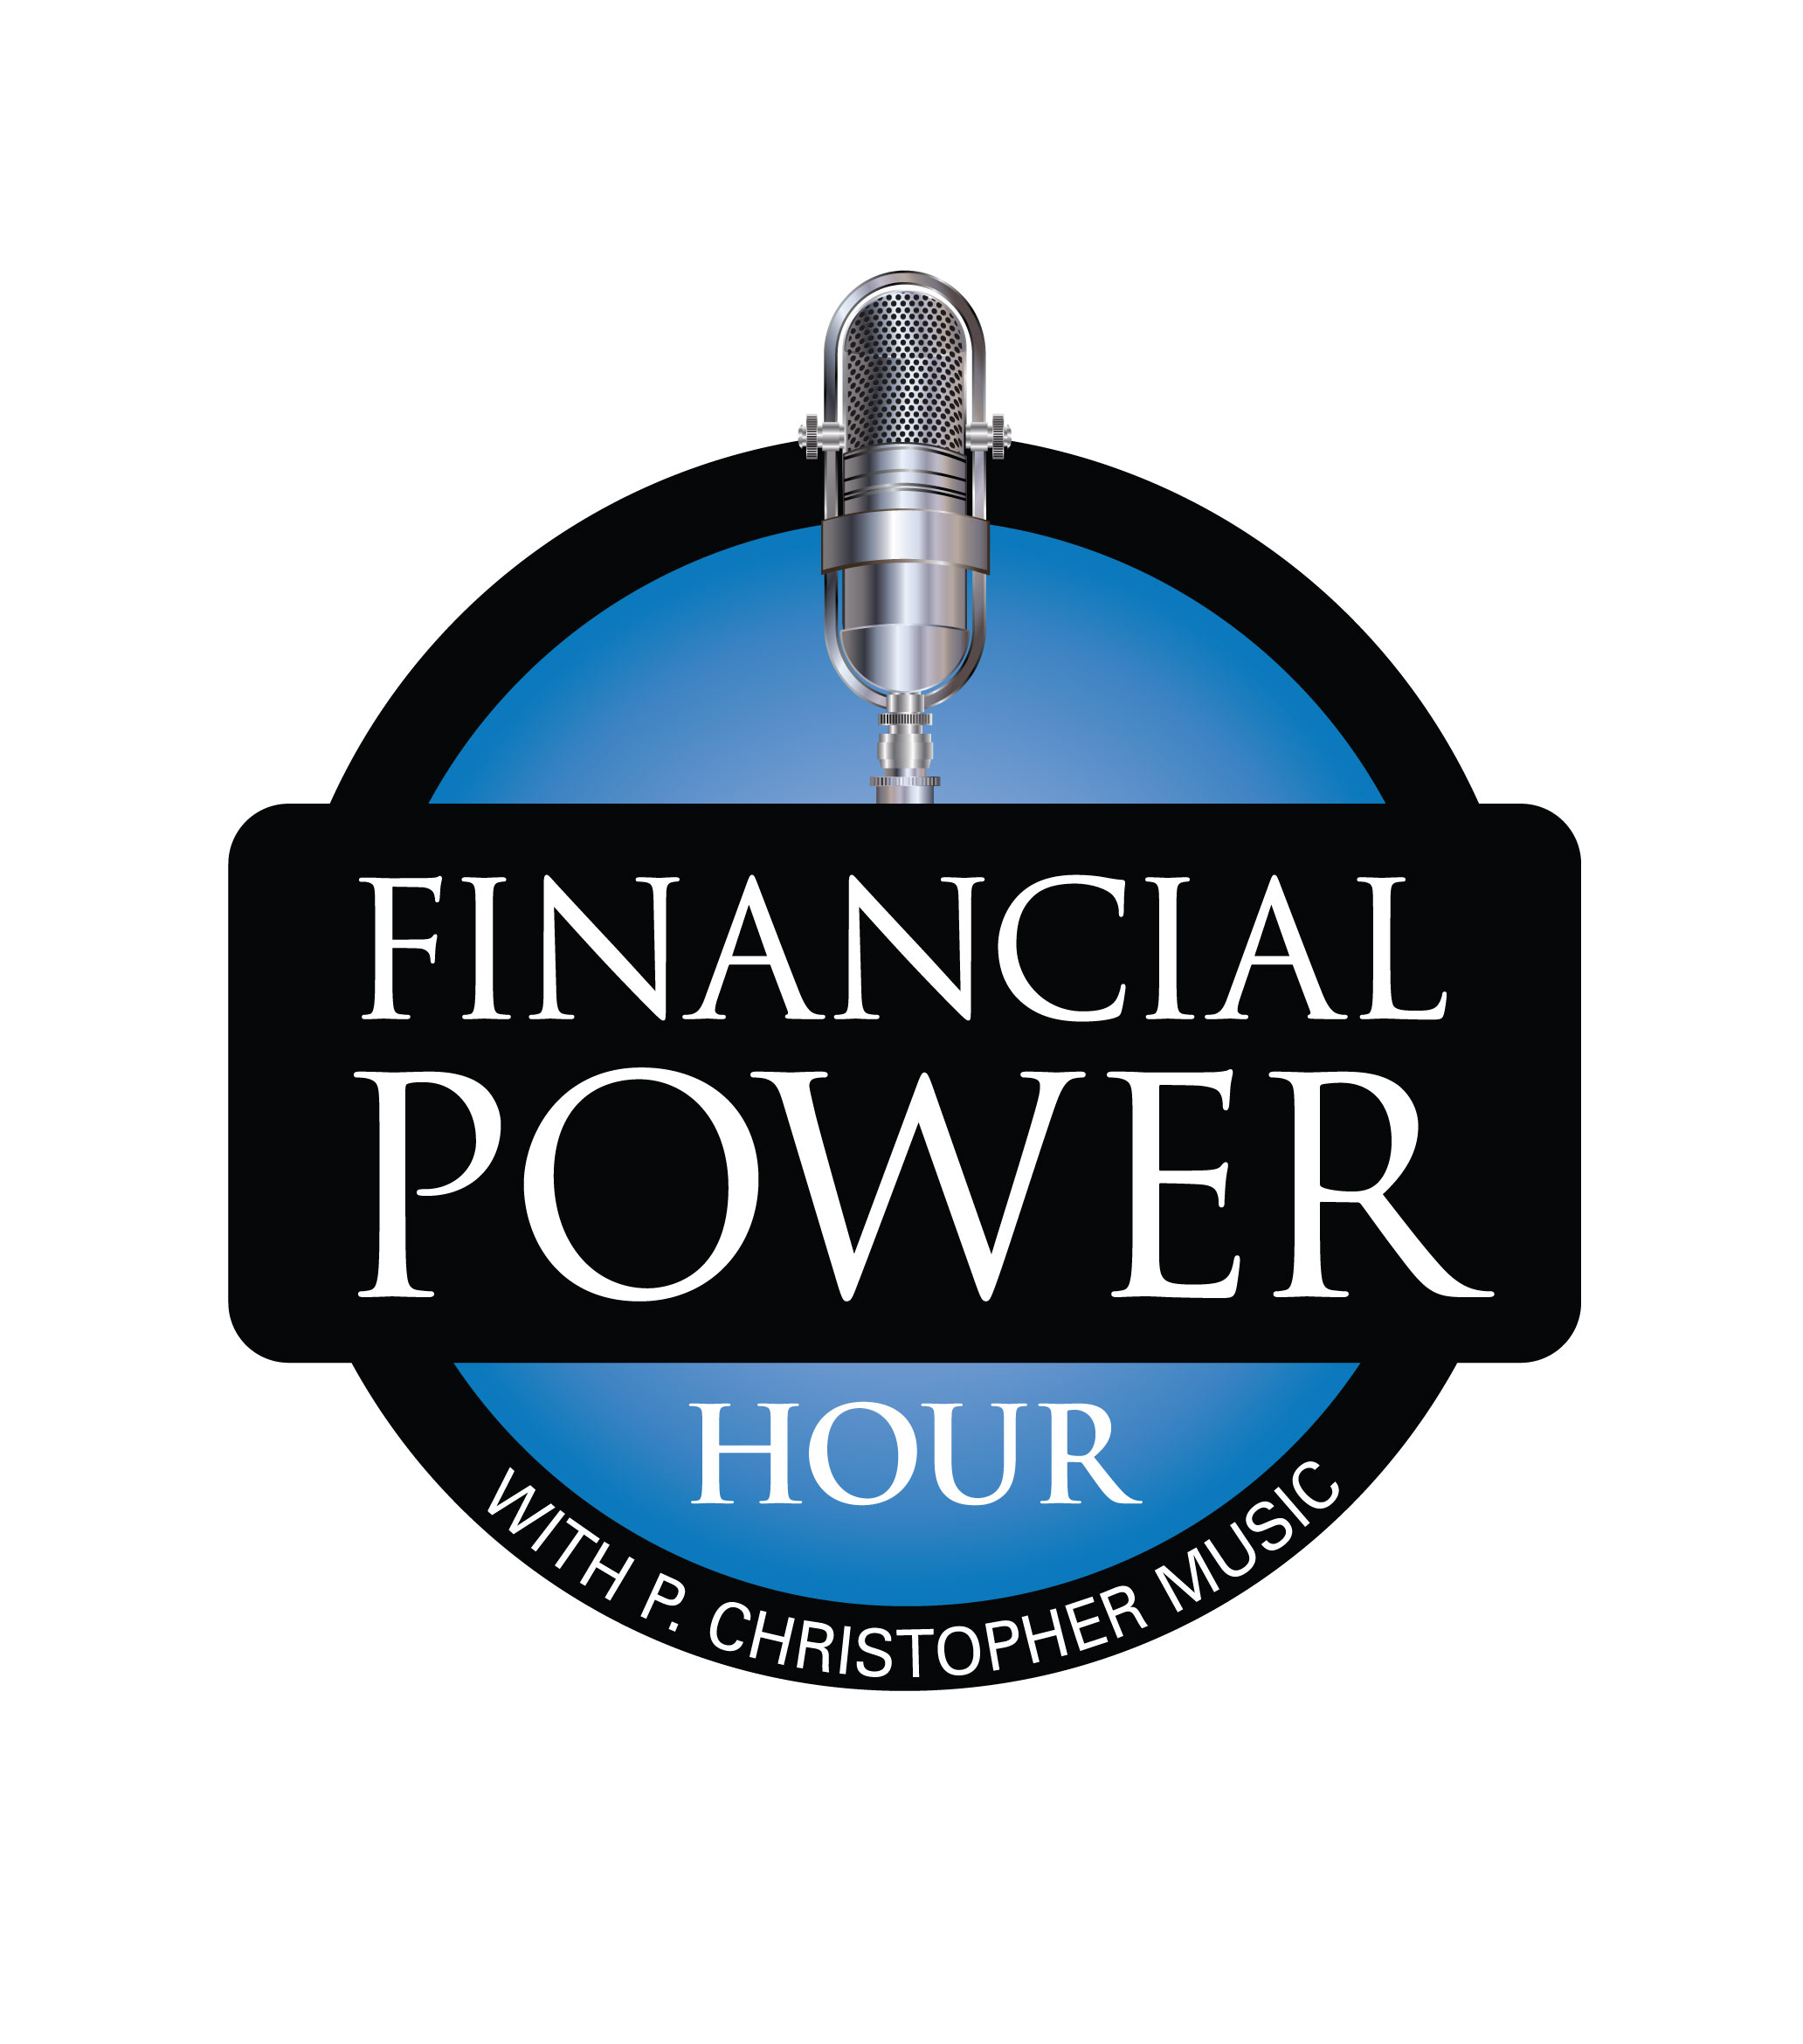 Financial Power Hour Radio Show with Host Christopher Music – Topic – Jump Start Your Marketing and Increase Sales Using Agile Marketing Strategies with Maria Matarelli with Agile Marketing Academy